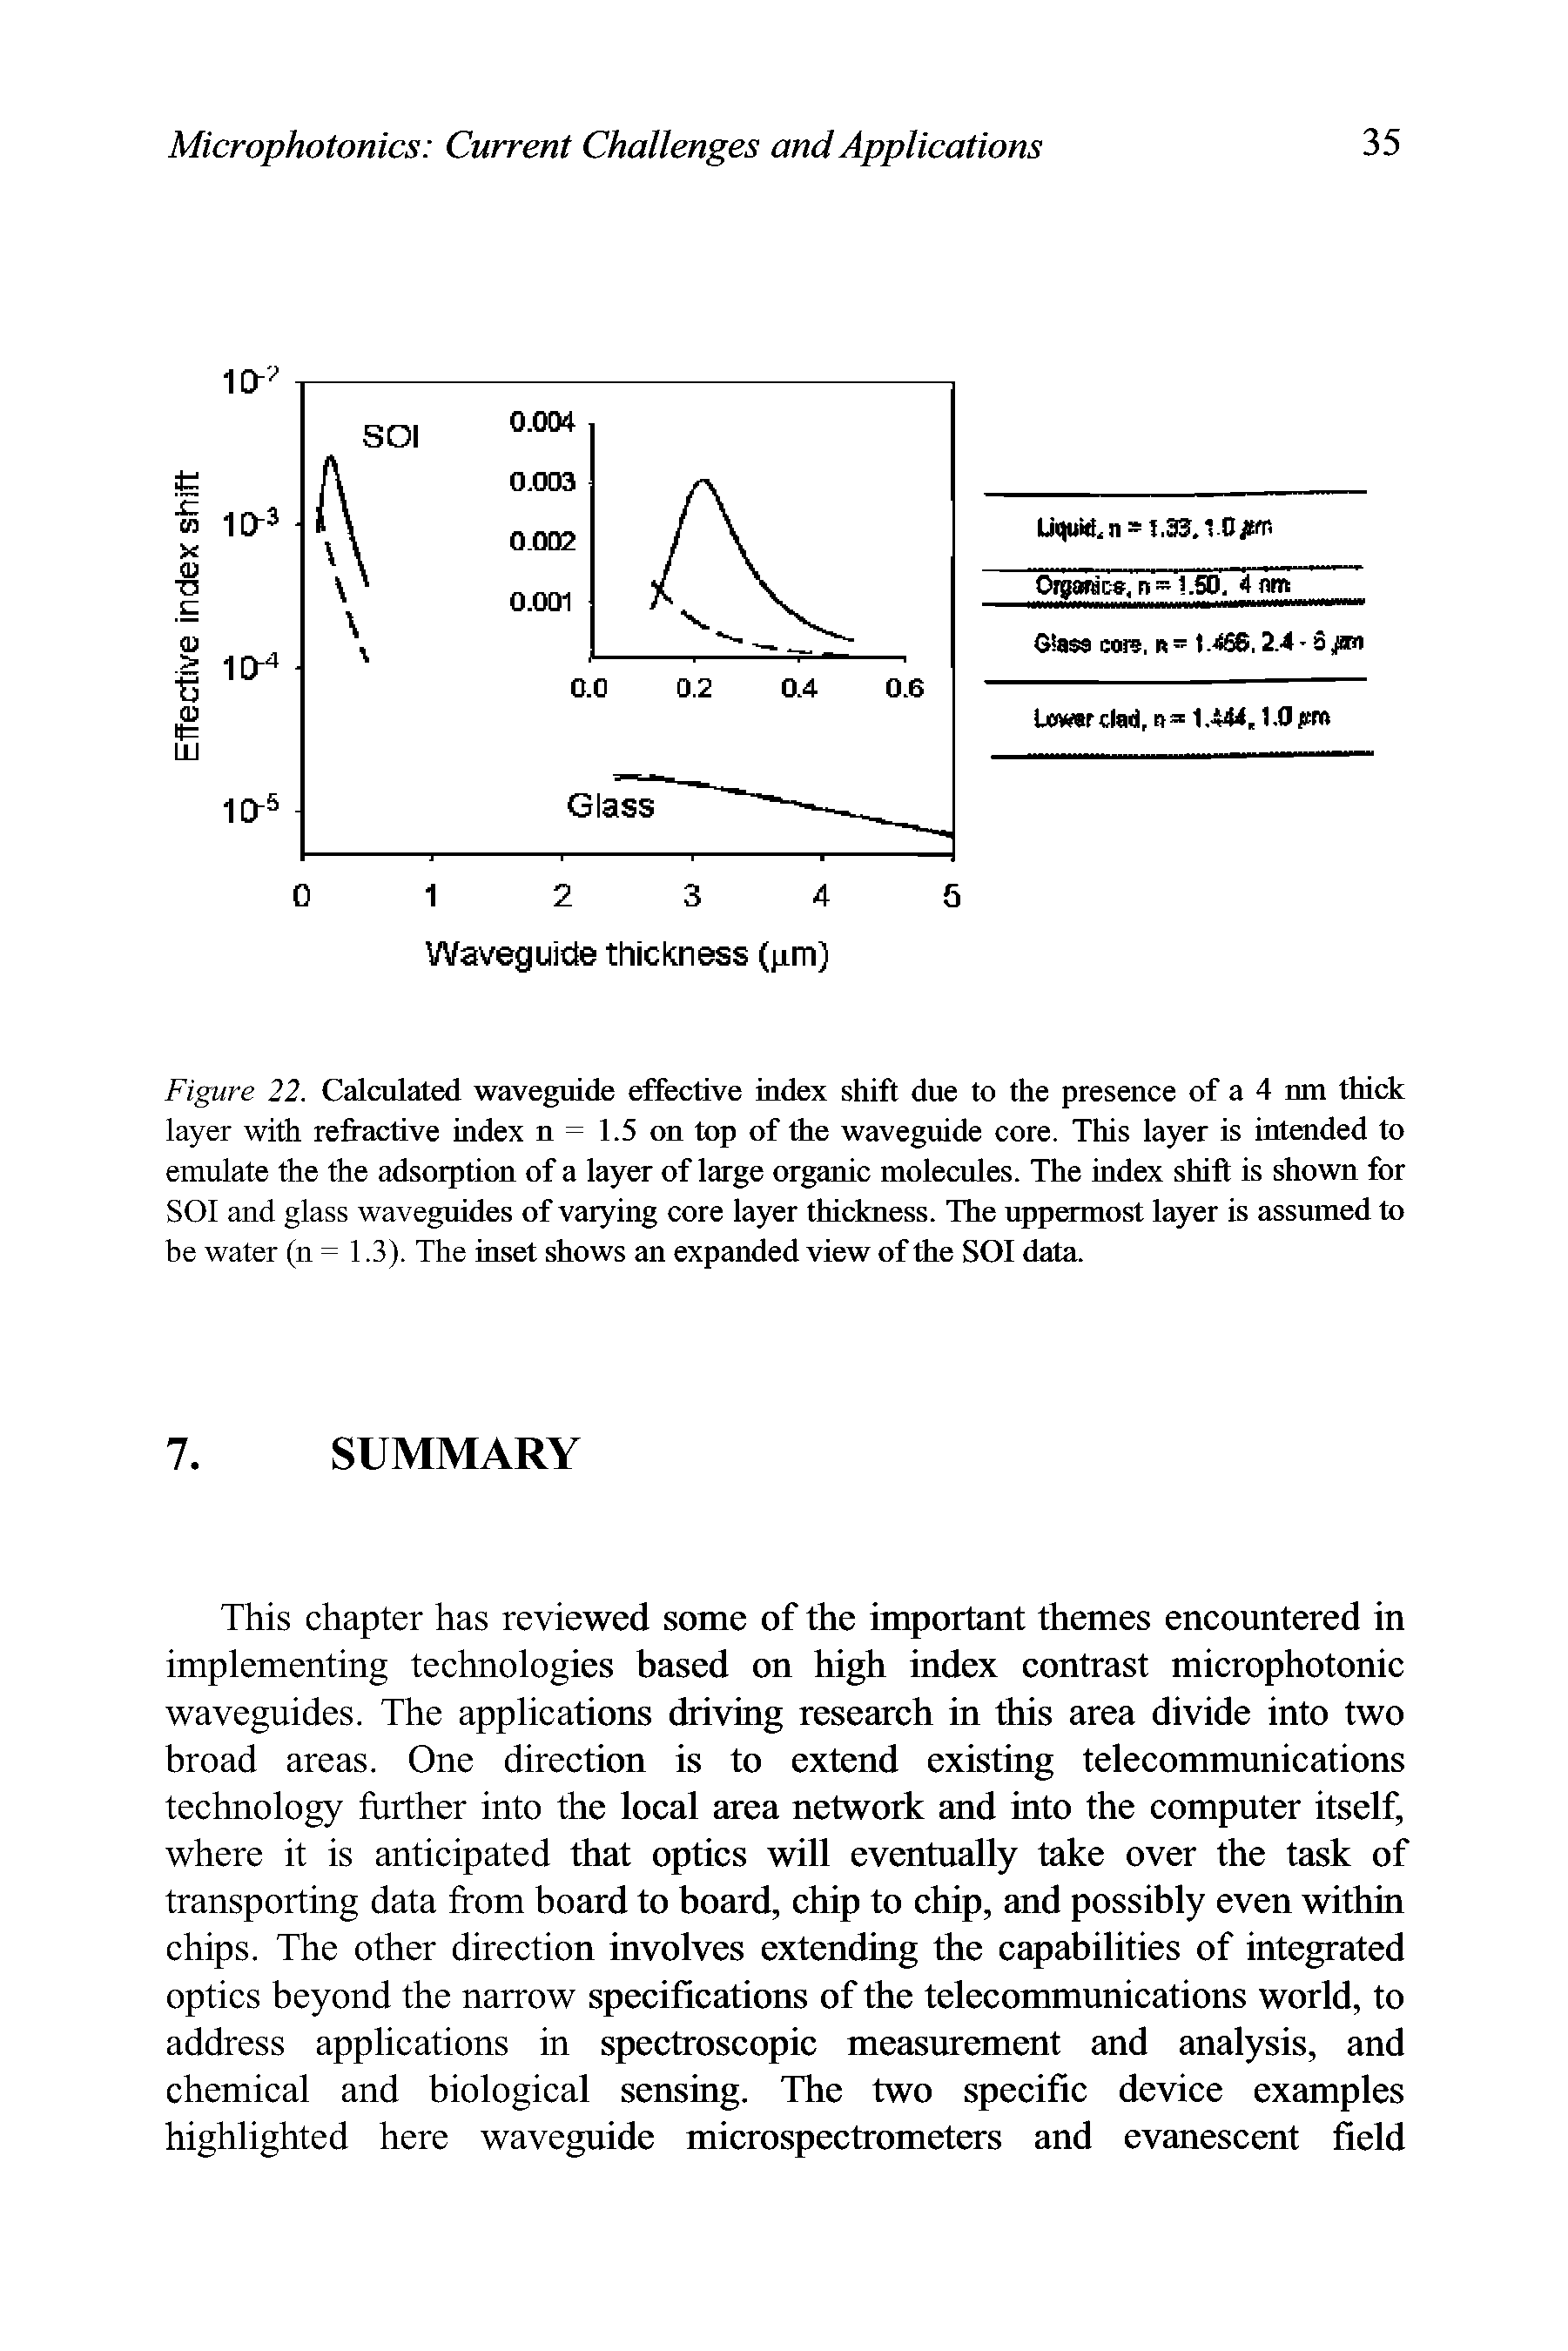 Figure 22. Calculated waveguide effective index shift due to the presence of a 4 nm thick layer with refractive index n = 1.5 on top of the waveguide core. This layer is intended to emulate the the adsorption of a layer of large organic molecules. The index shift is shown for SOI and glass waveguides of varying core layer thickness. The uppermost layer is assumed to be water (n = 1.3). The inset shows an expanded view of the SOI data.